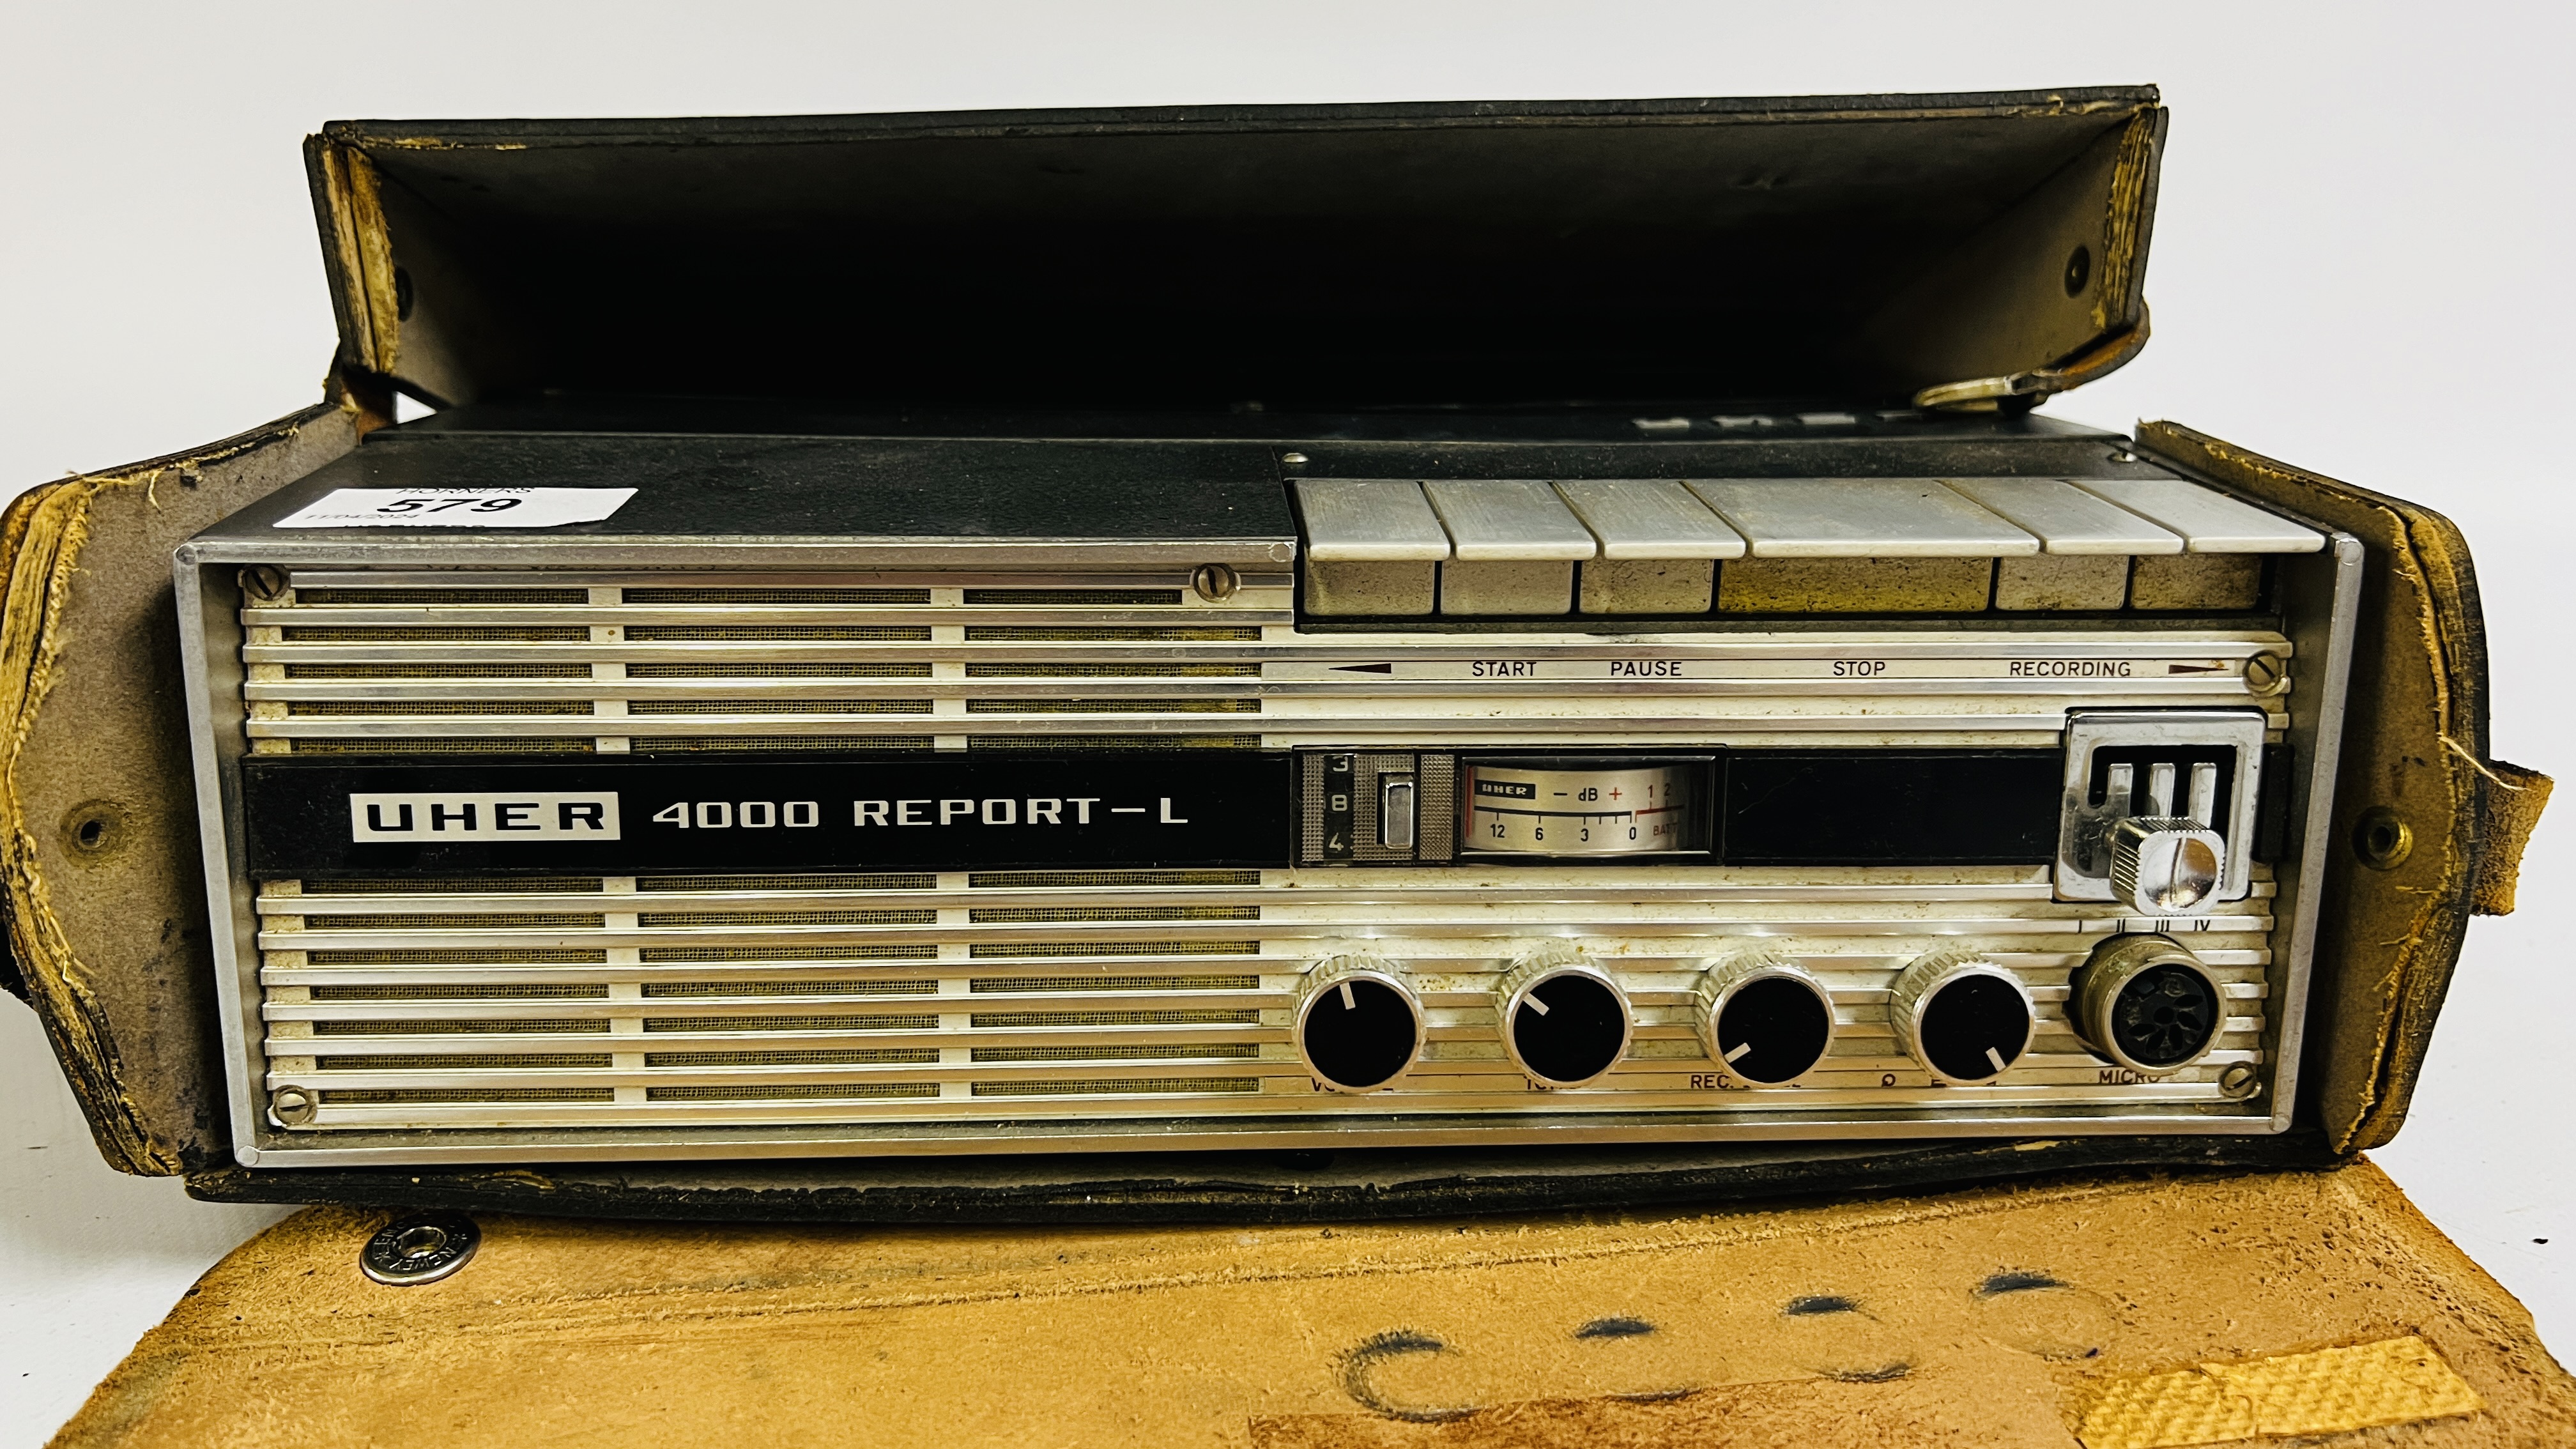 A VINTAGE UHER 4000 REPORT-L REEL TO REEL TAPE RECORDER IN FITTED LEATHER CASE - COLLECTORS ITEM - Image 2 of 8